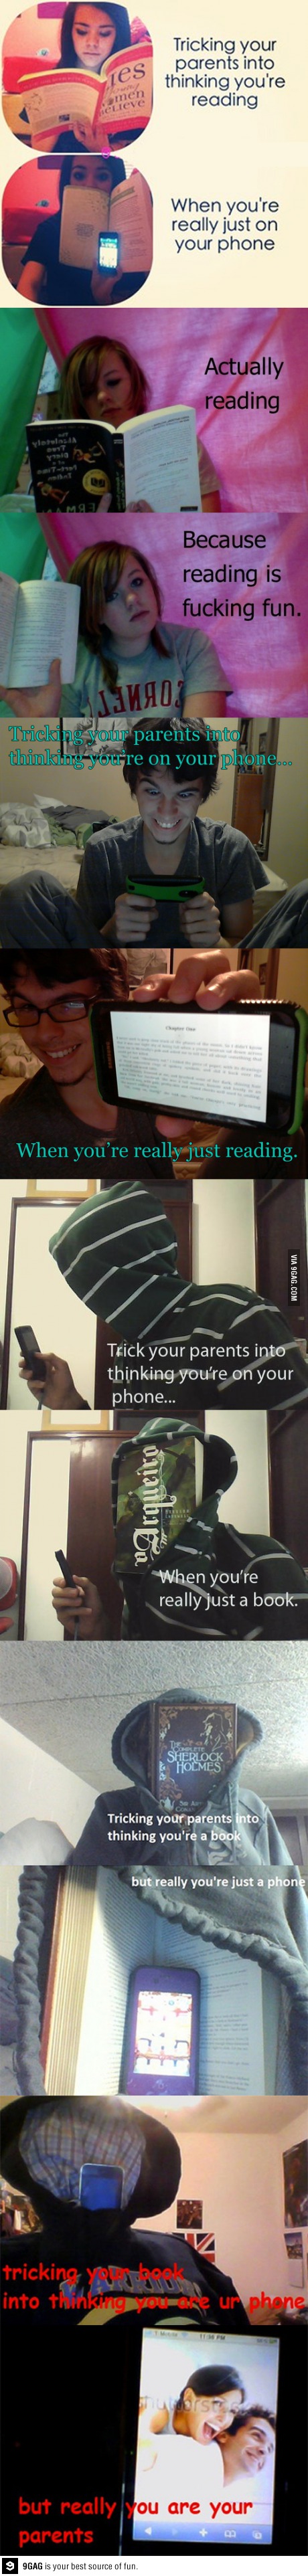 ticking your parents into thinking you're reading, when you're really on your phone